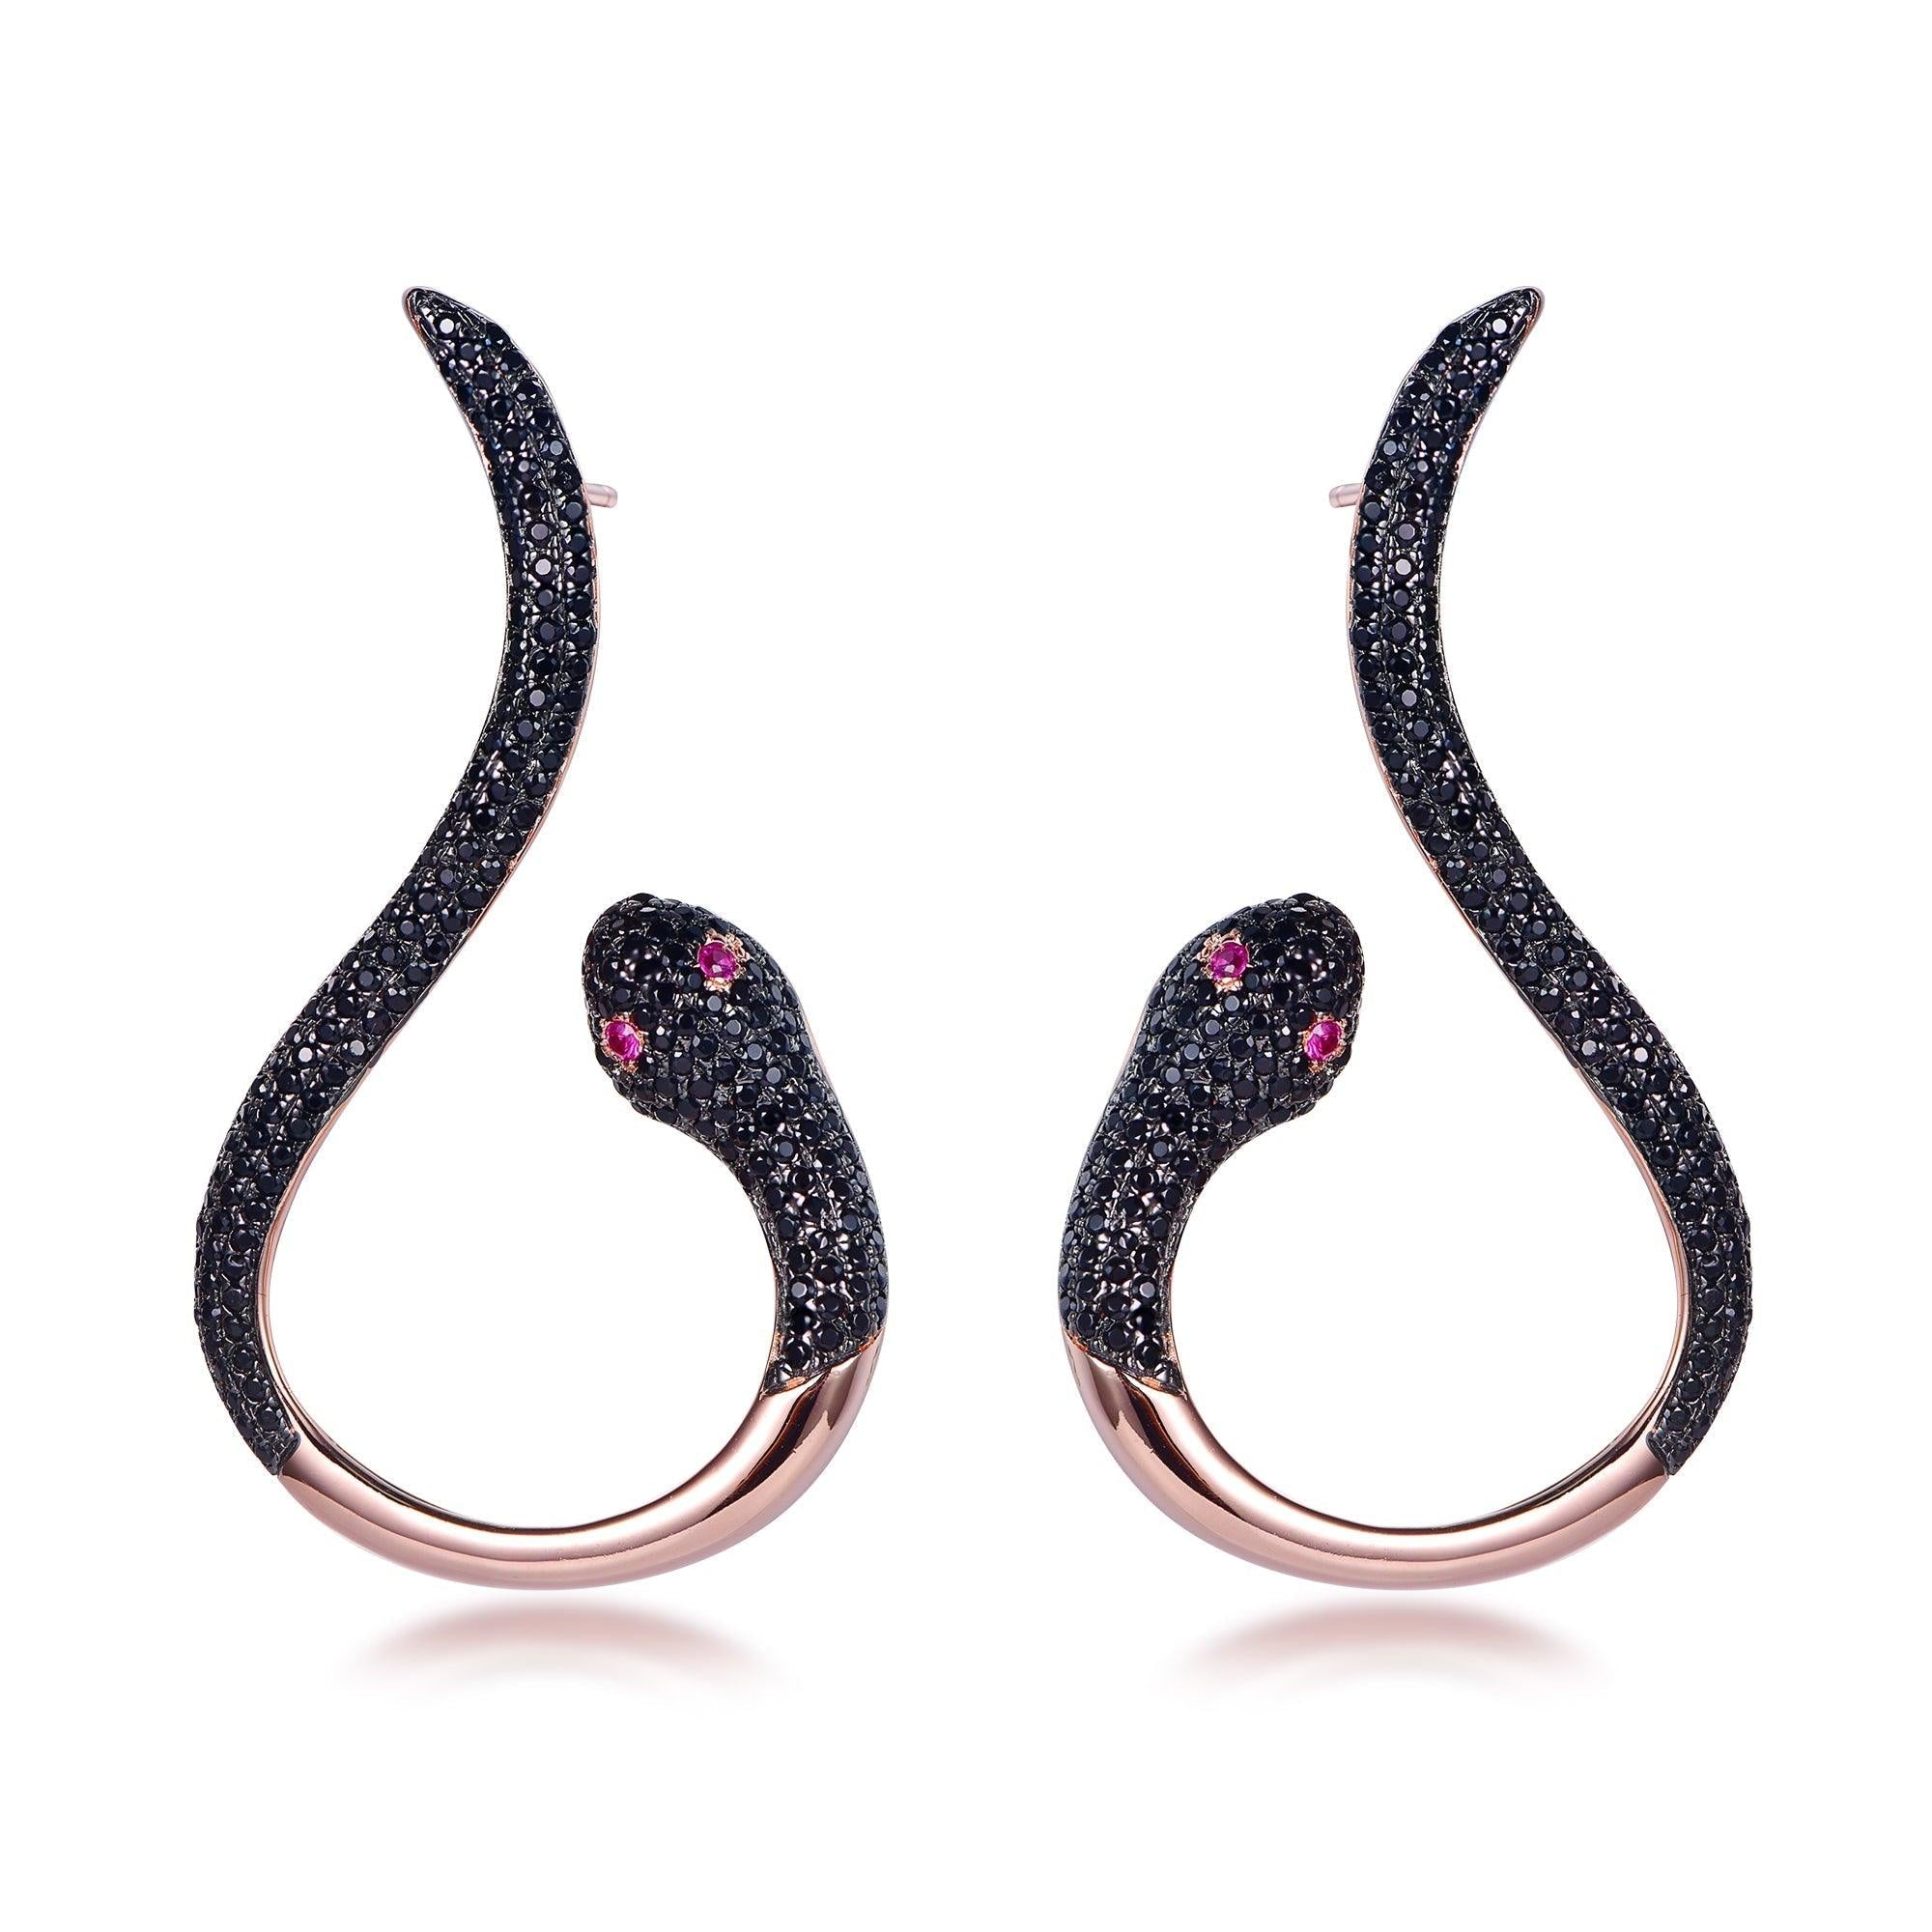 Pair of Rose Gold Plated Slither Earrings